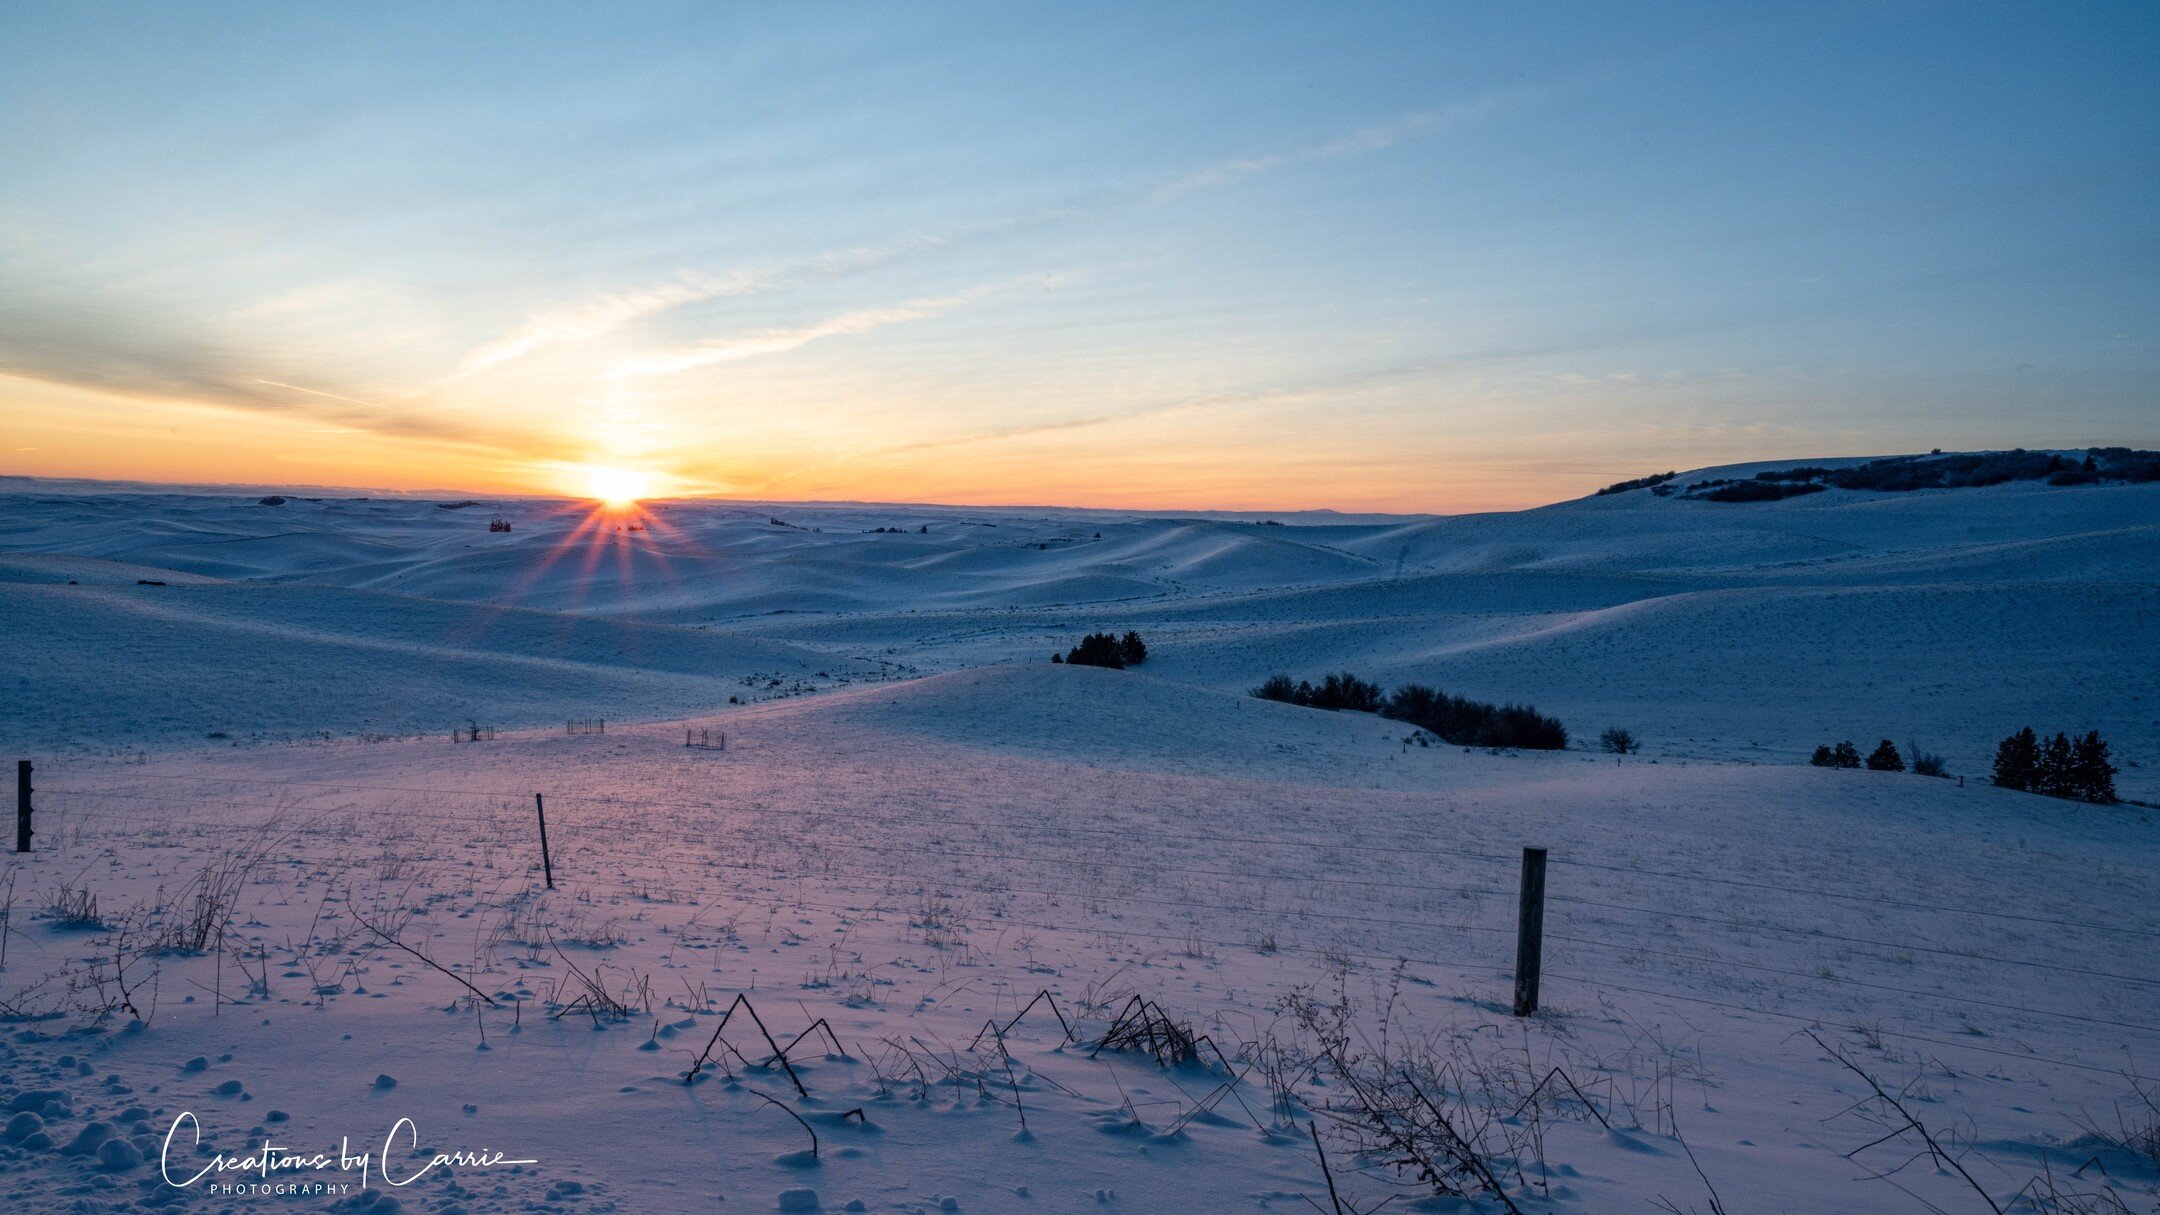 Frozen landscape with -20 degree temps while I was taking this photo!
#palouse#rollinghills#frozenlandscape#wintersunrise#idaho#idahome